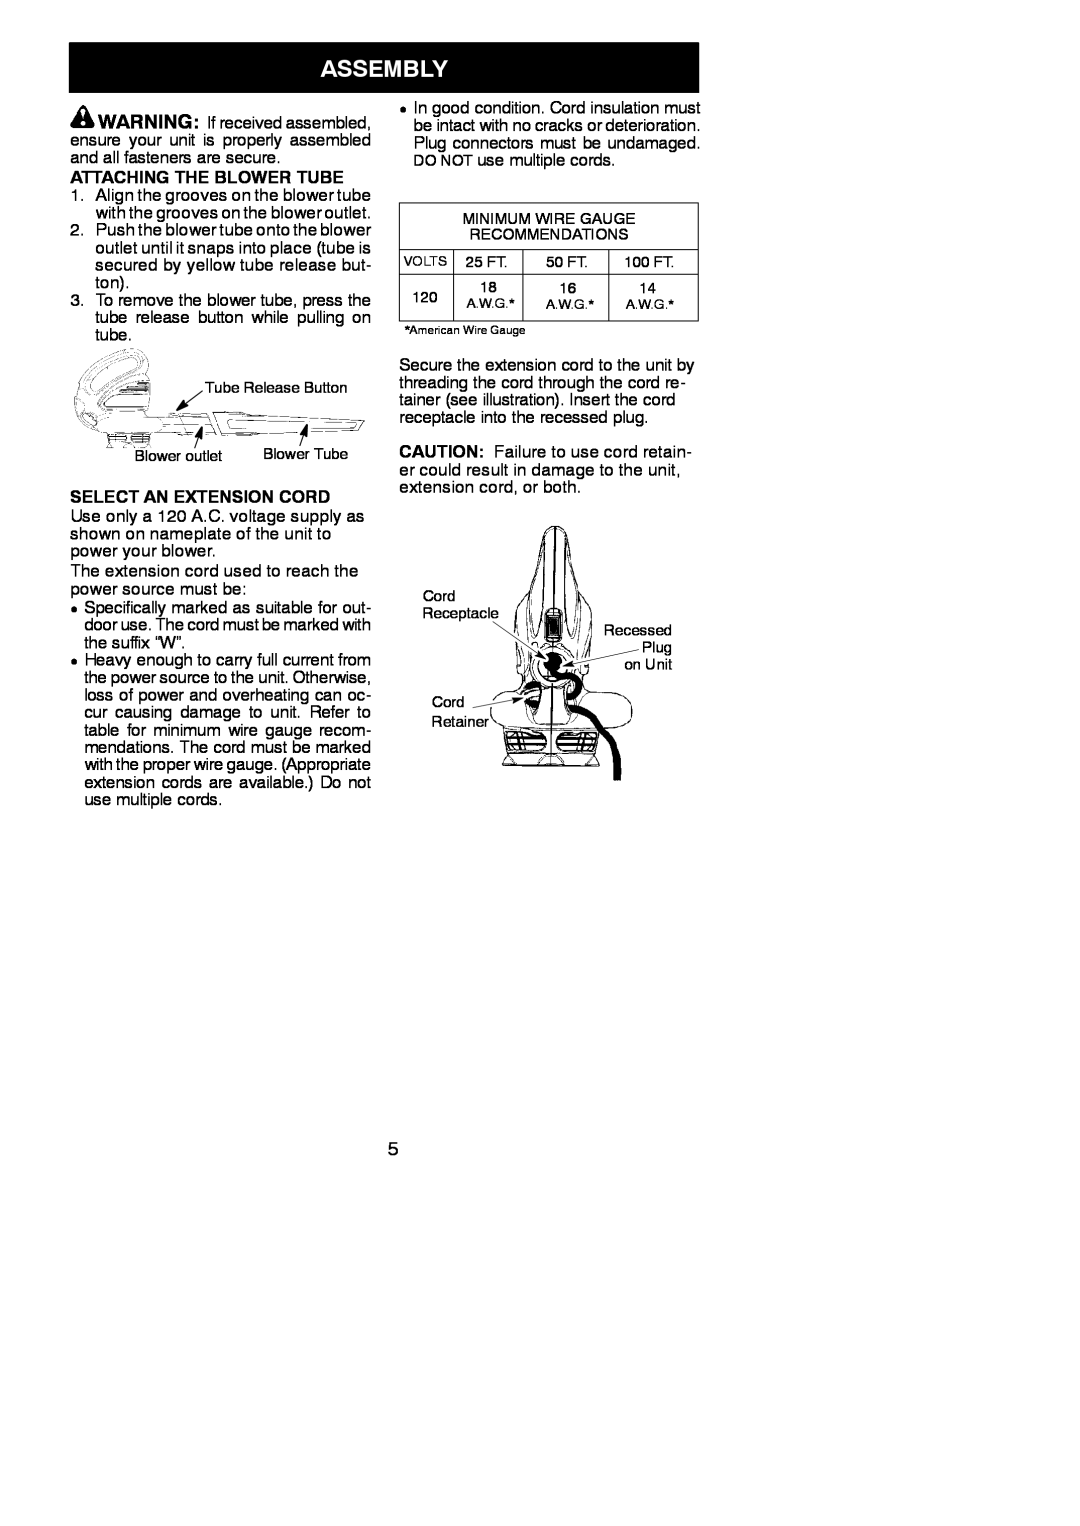 Weed Eater 952711855 instruction manual Assembly, Attaching The Blower Tube, Select An Extension Cord 